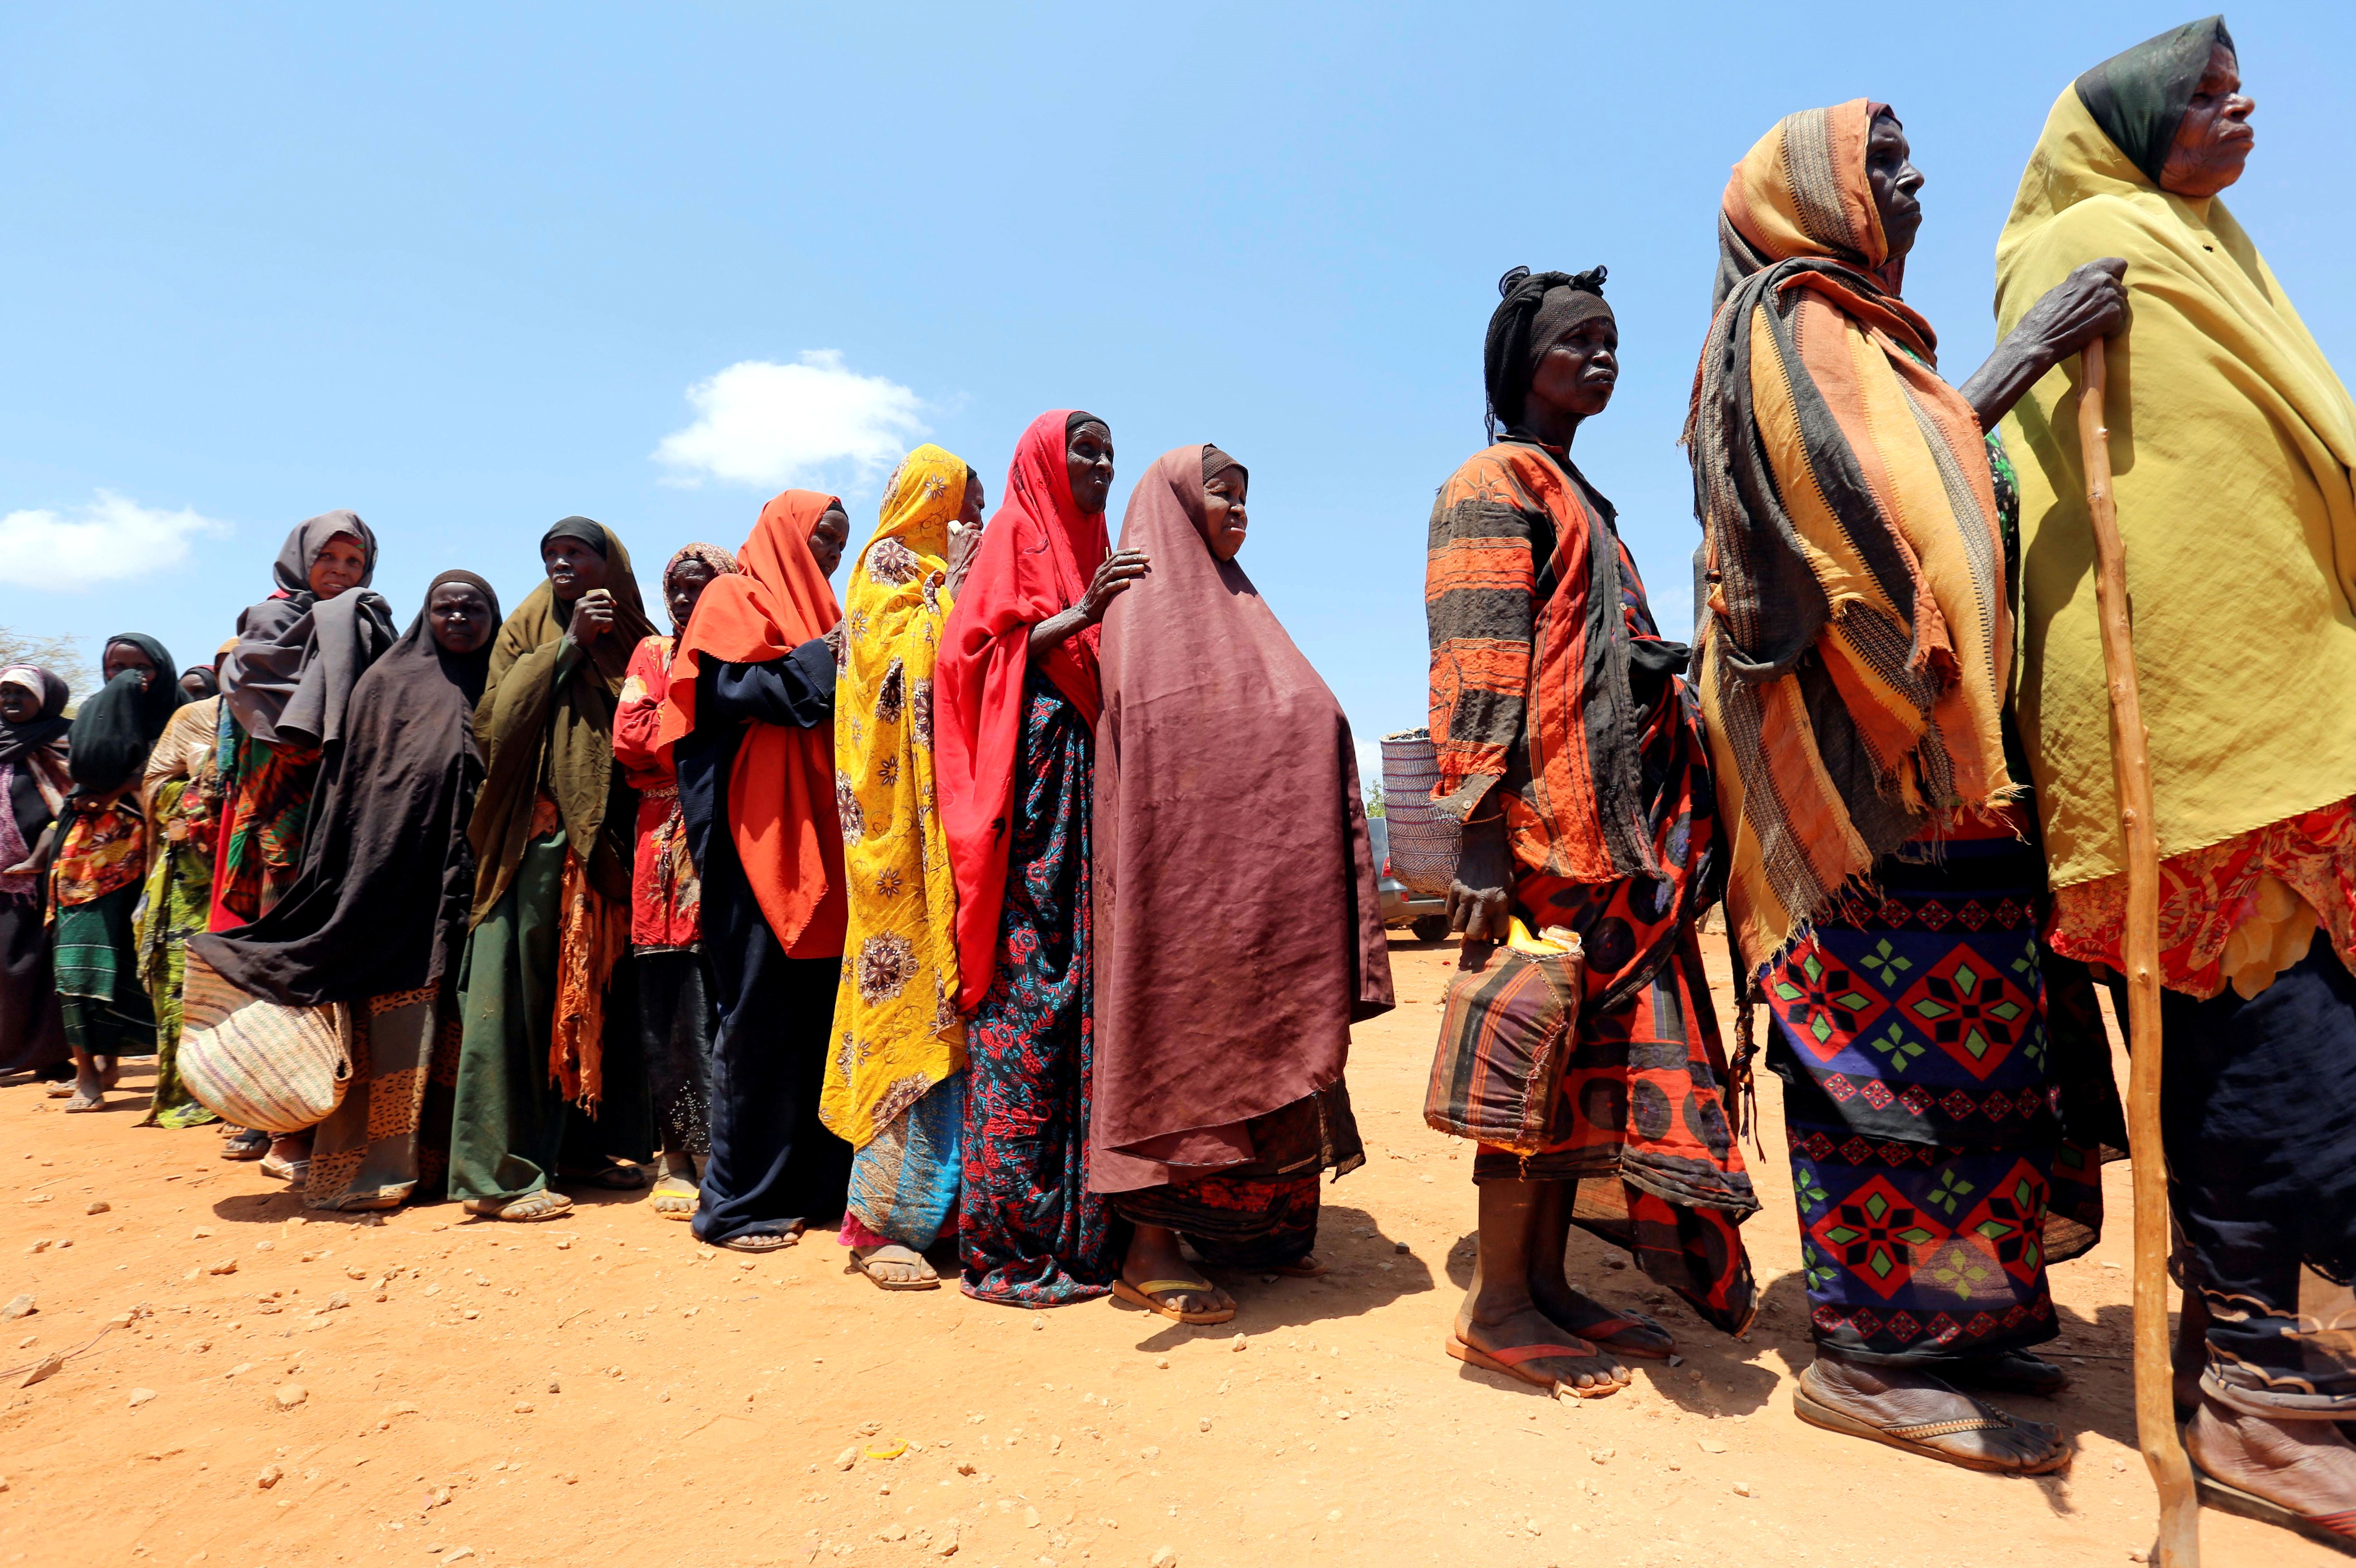 Internally displaced Somali women queue for relief food at a distribution centre organized by a Qatar charity after fleeing from drought stricken regions in Baidoa, west of Somalia's capital Mogadishu, April 9, 2017 (credit: REUTERS)